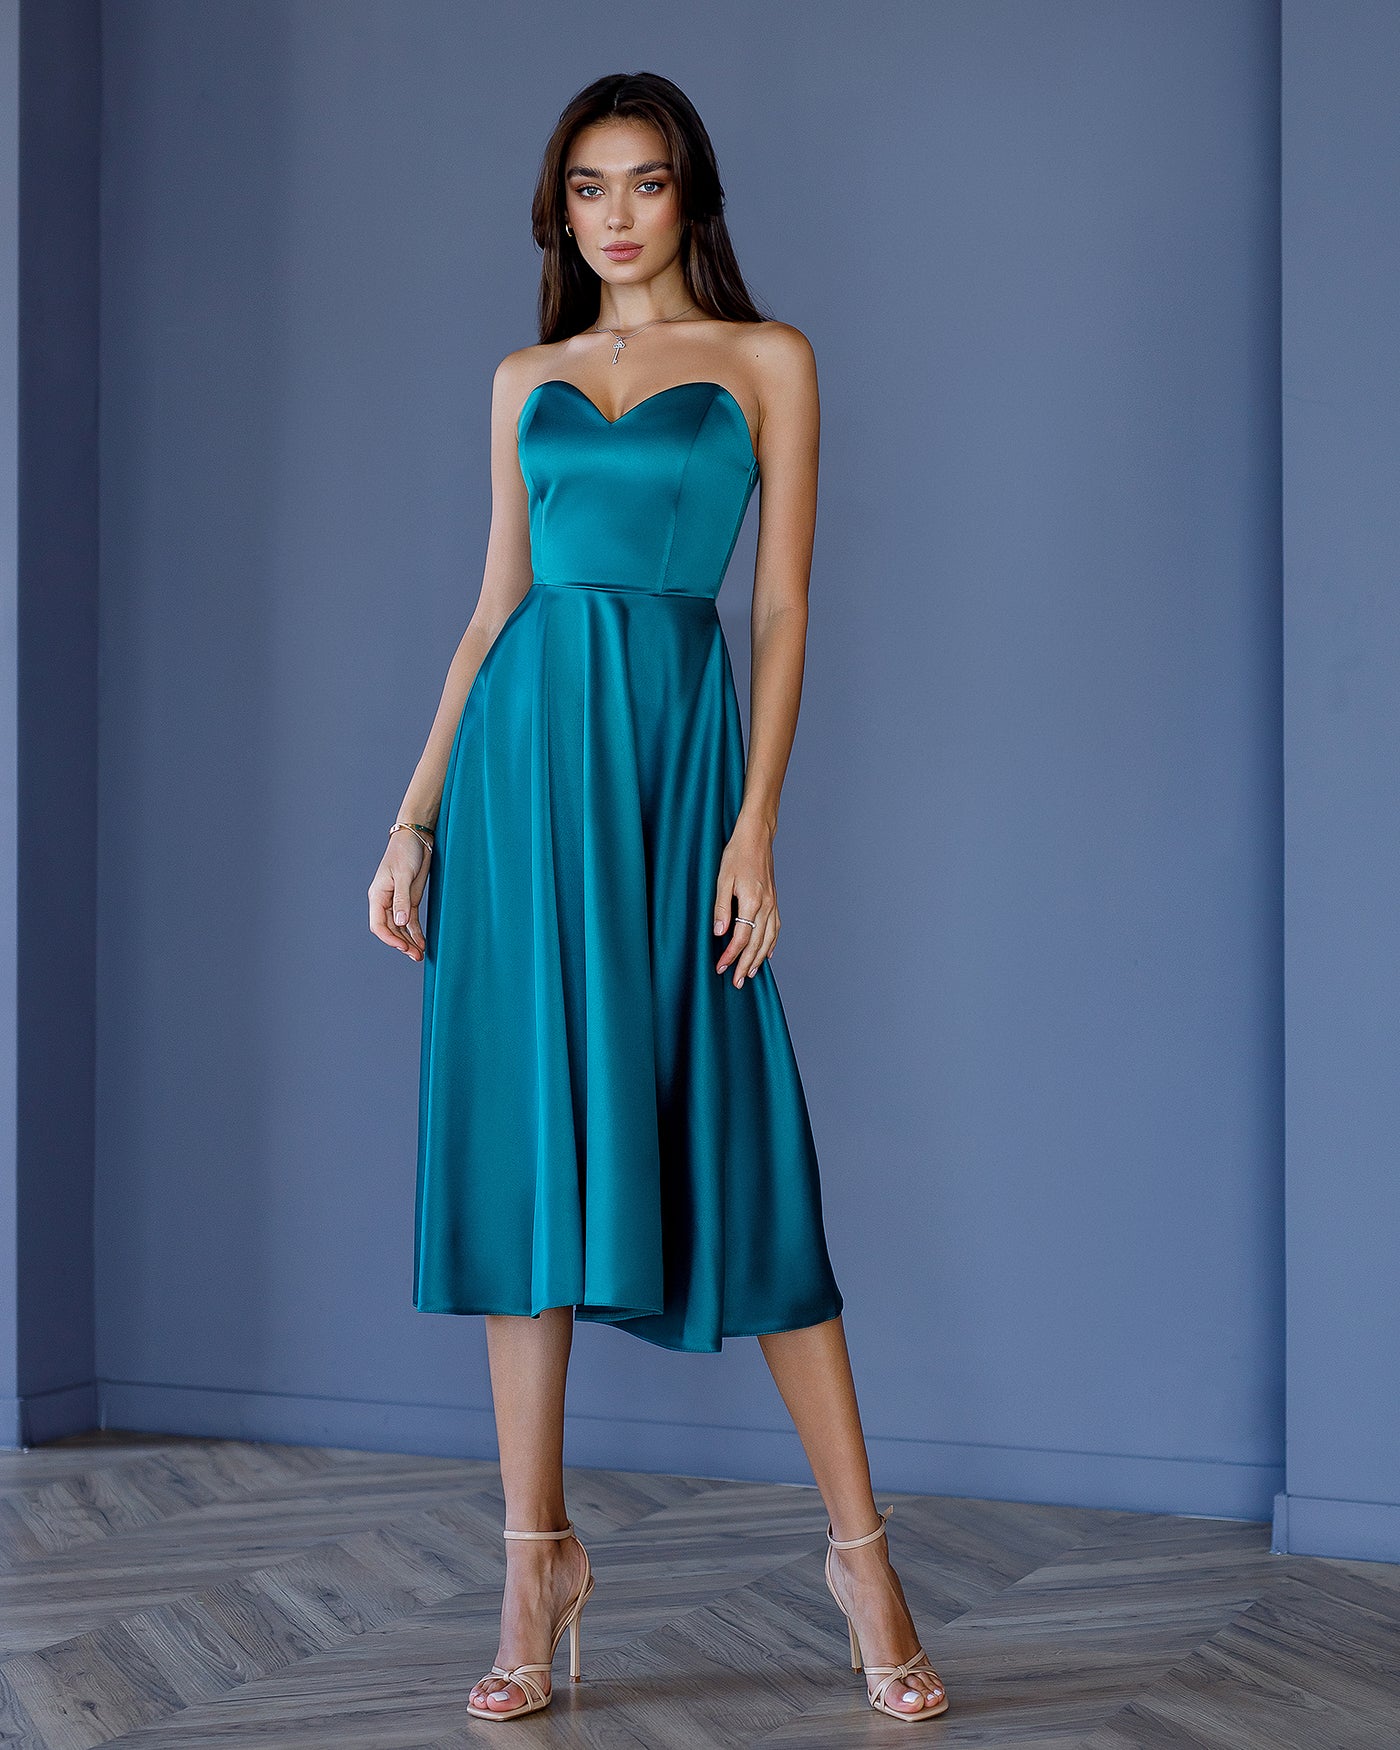 Emerald SATIN CORSETED STRAPLESS DRESS (ARTICLE 047)